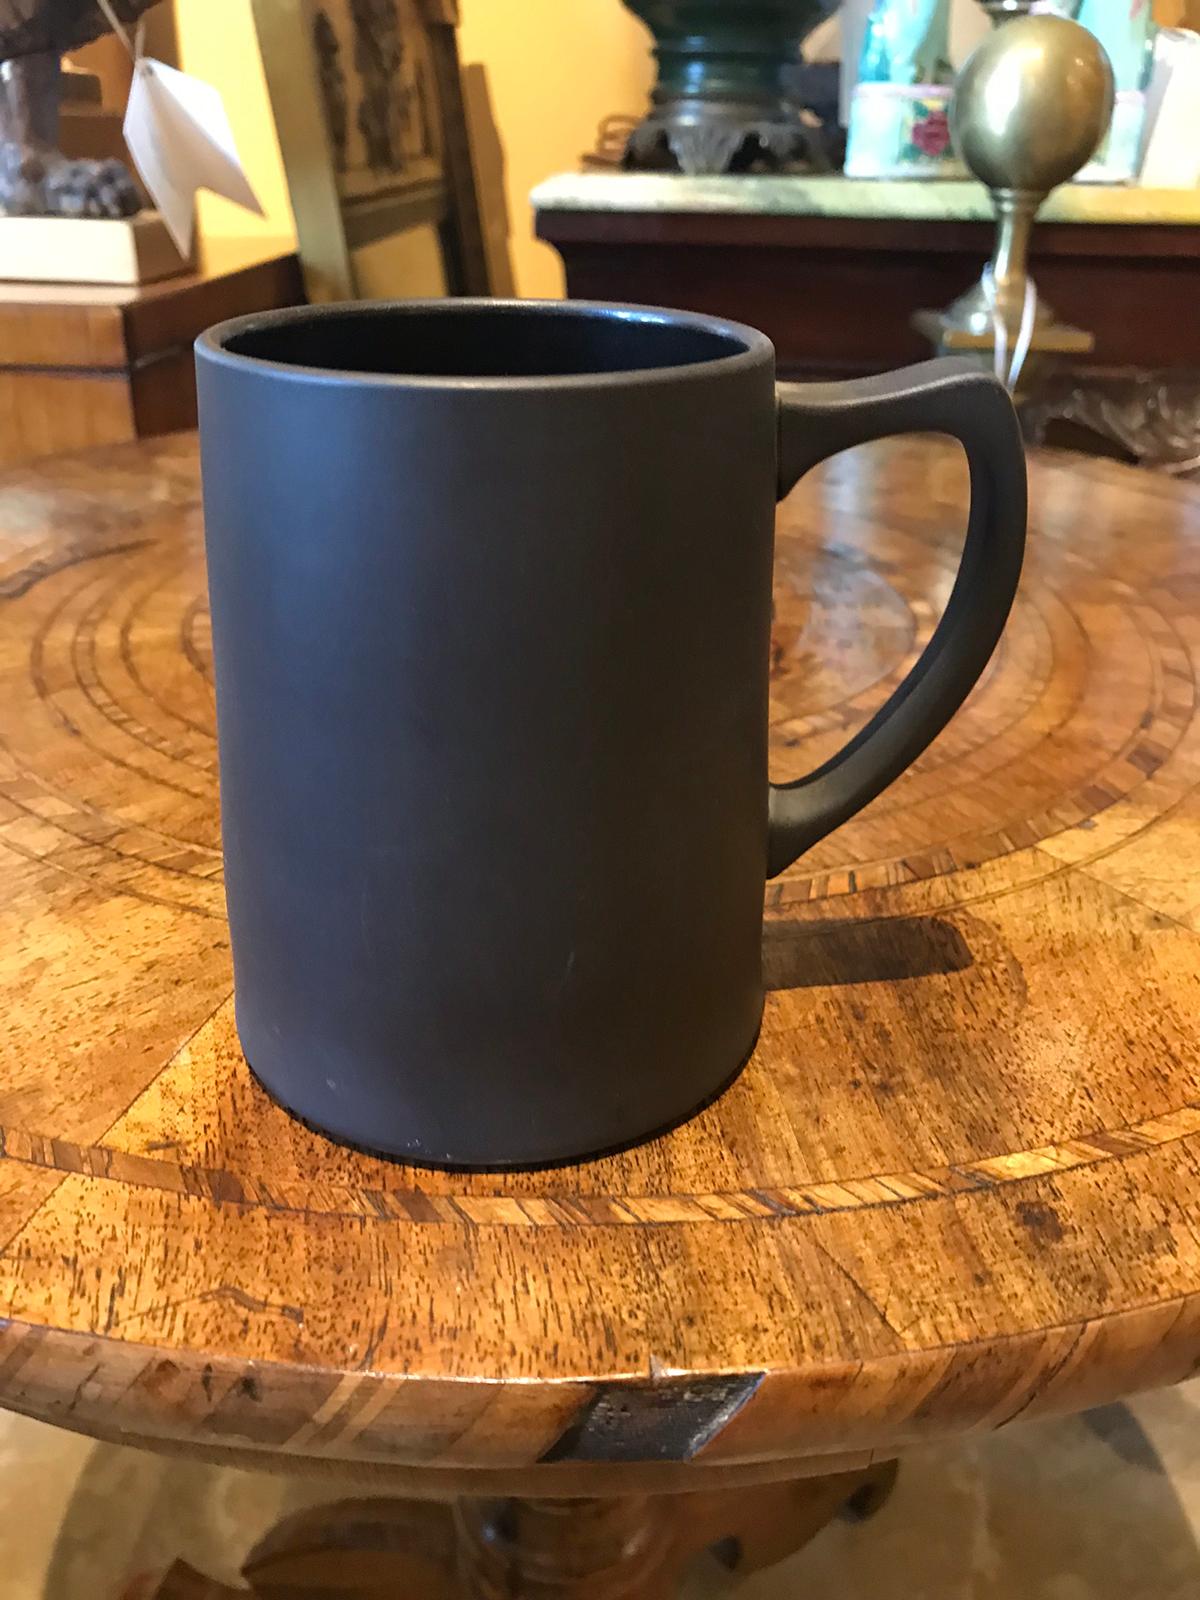 20th century English Wedgwood basalt cup with handle.